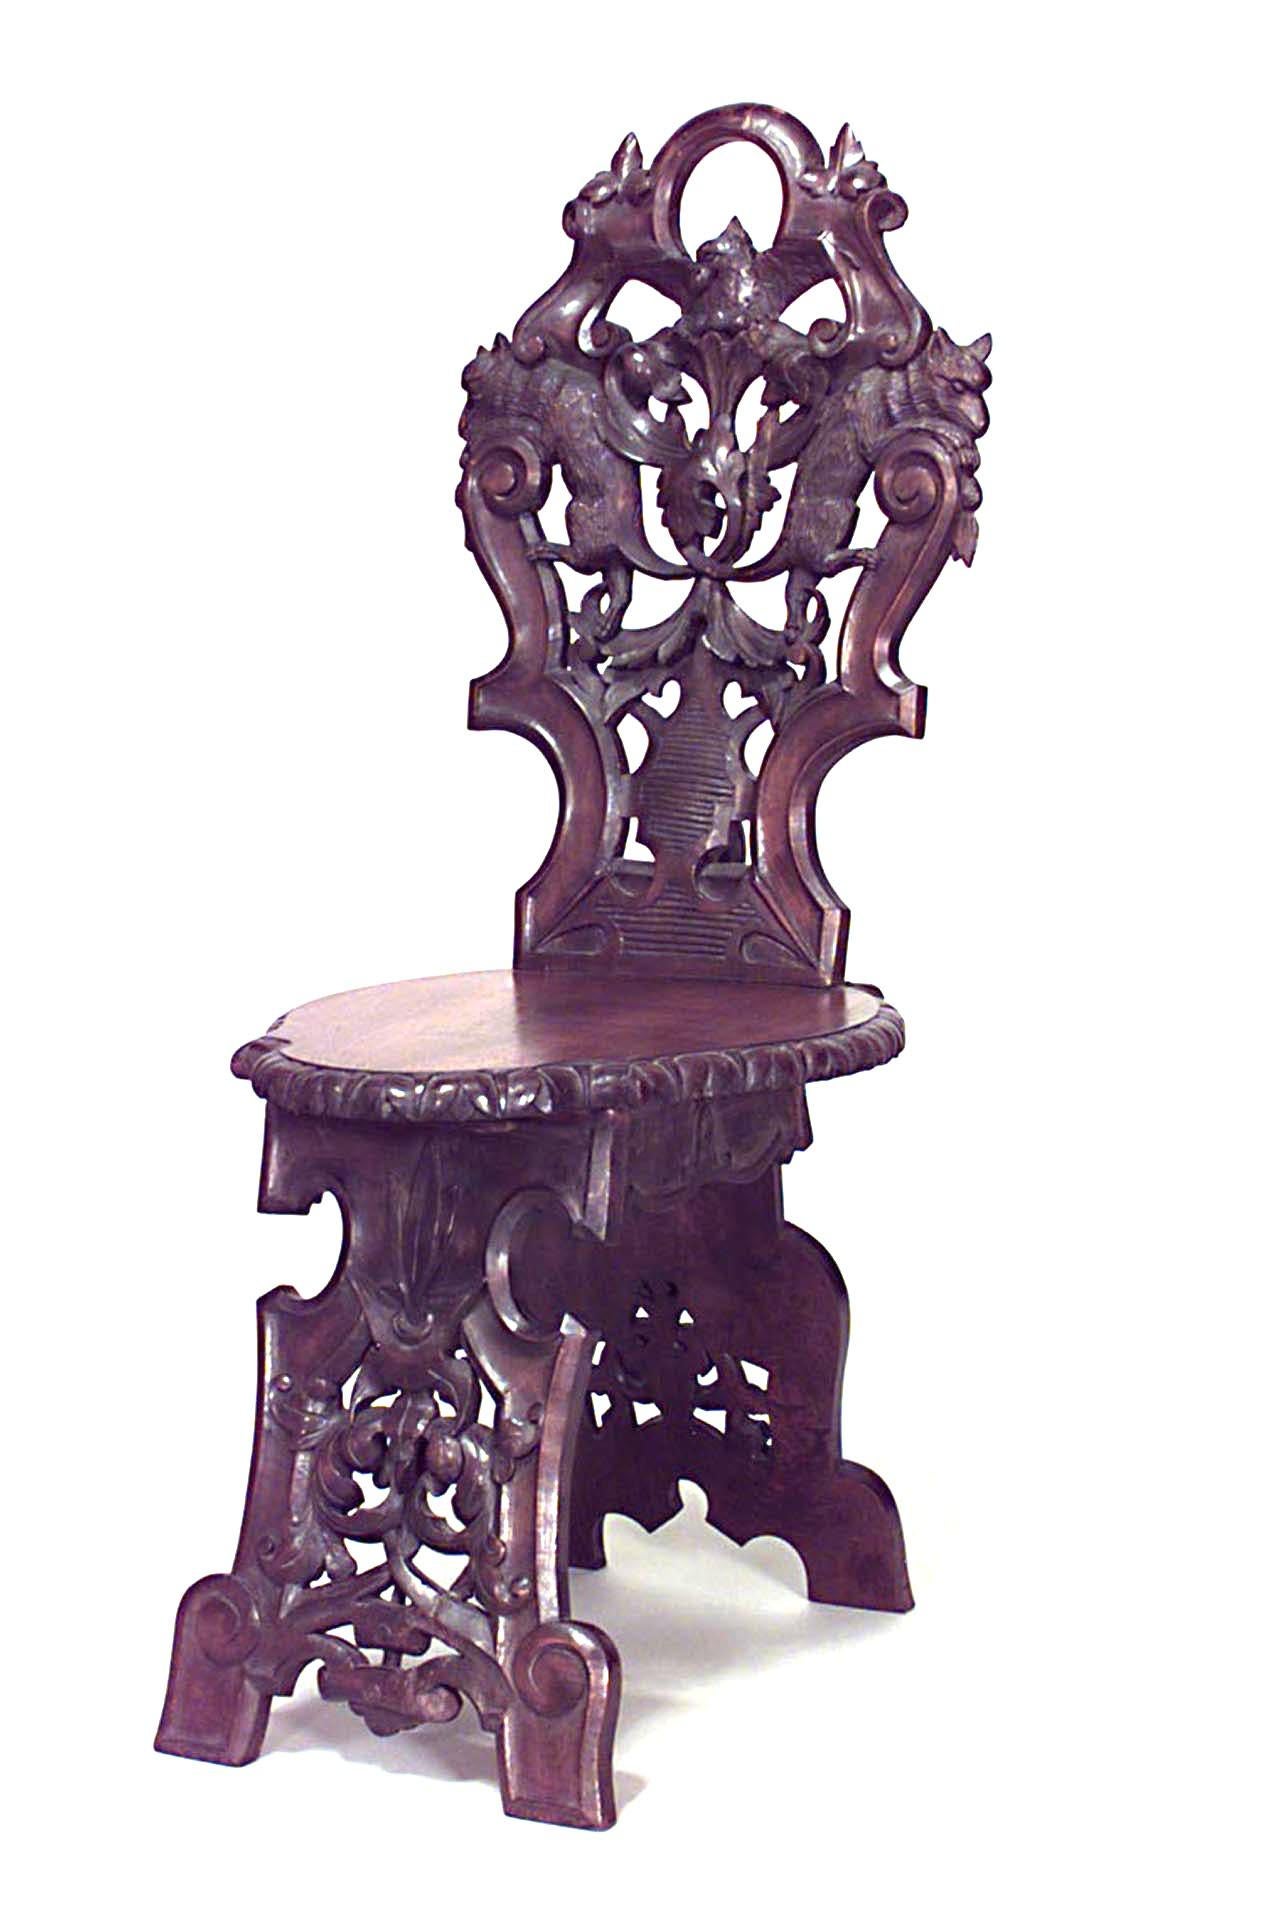 Set of 10 Rustic Black Forest (19th Cent) walnut side chairs with shaped seat and back with filigree carving and animals.
